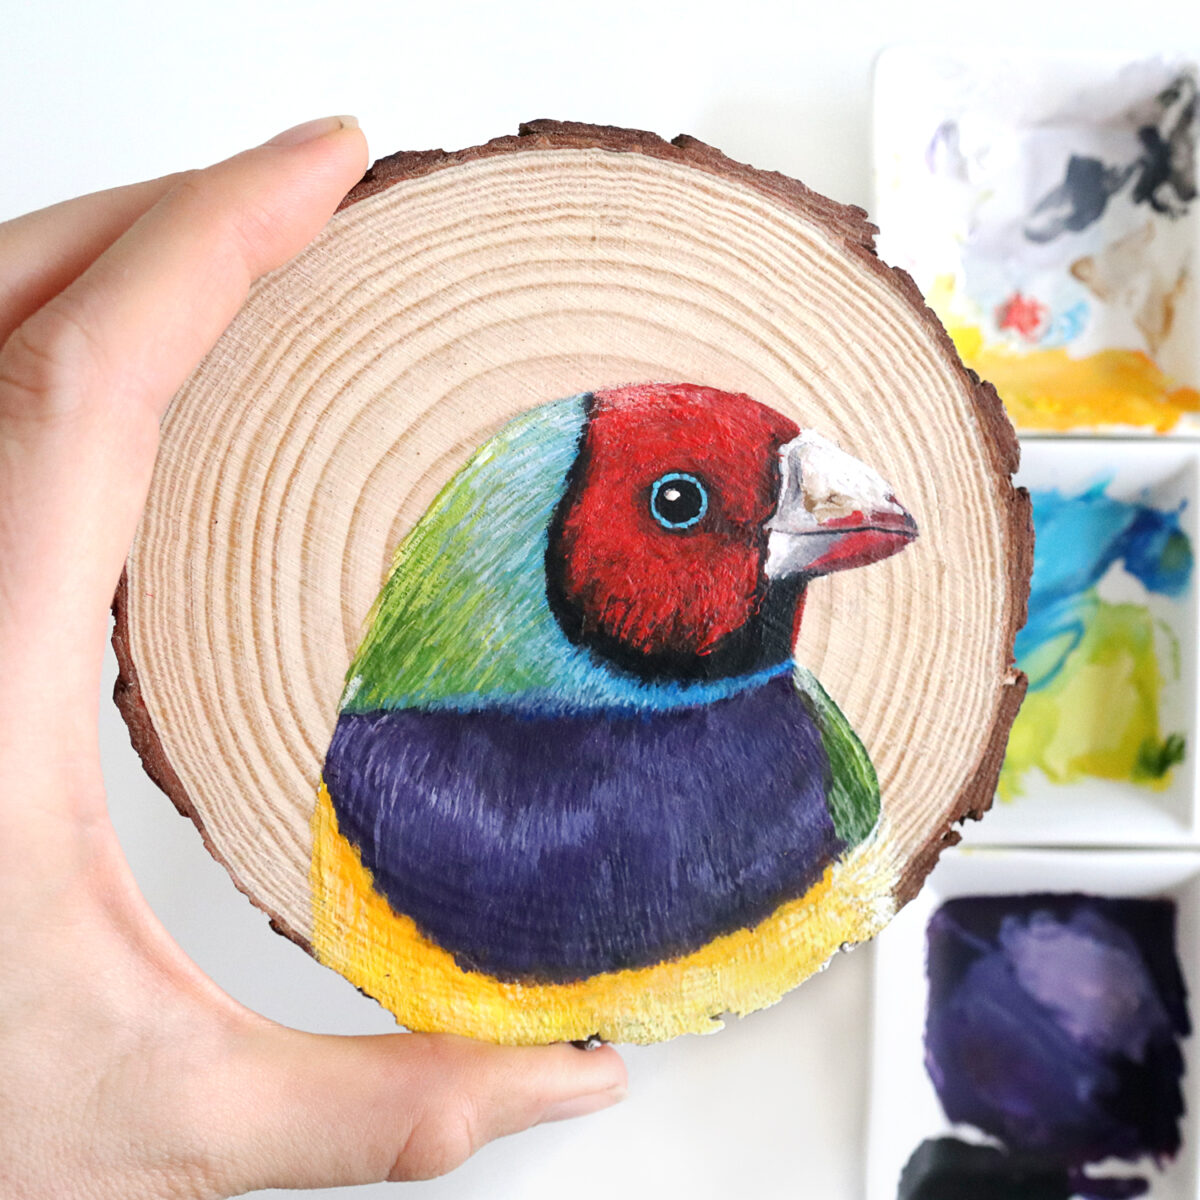 100 Days Of Birds A Marvelous Series Of Gouache On Wood Paintings By Deanna Maree (3)